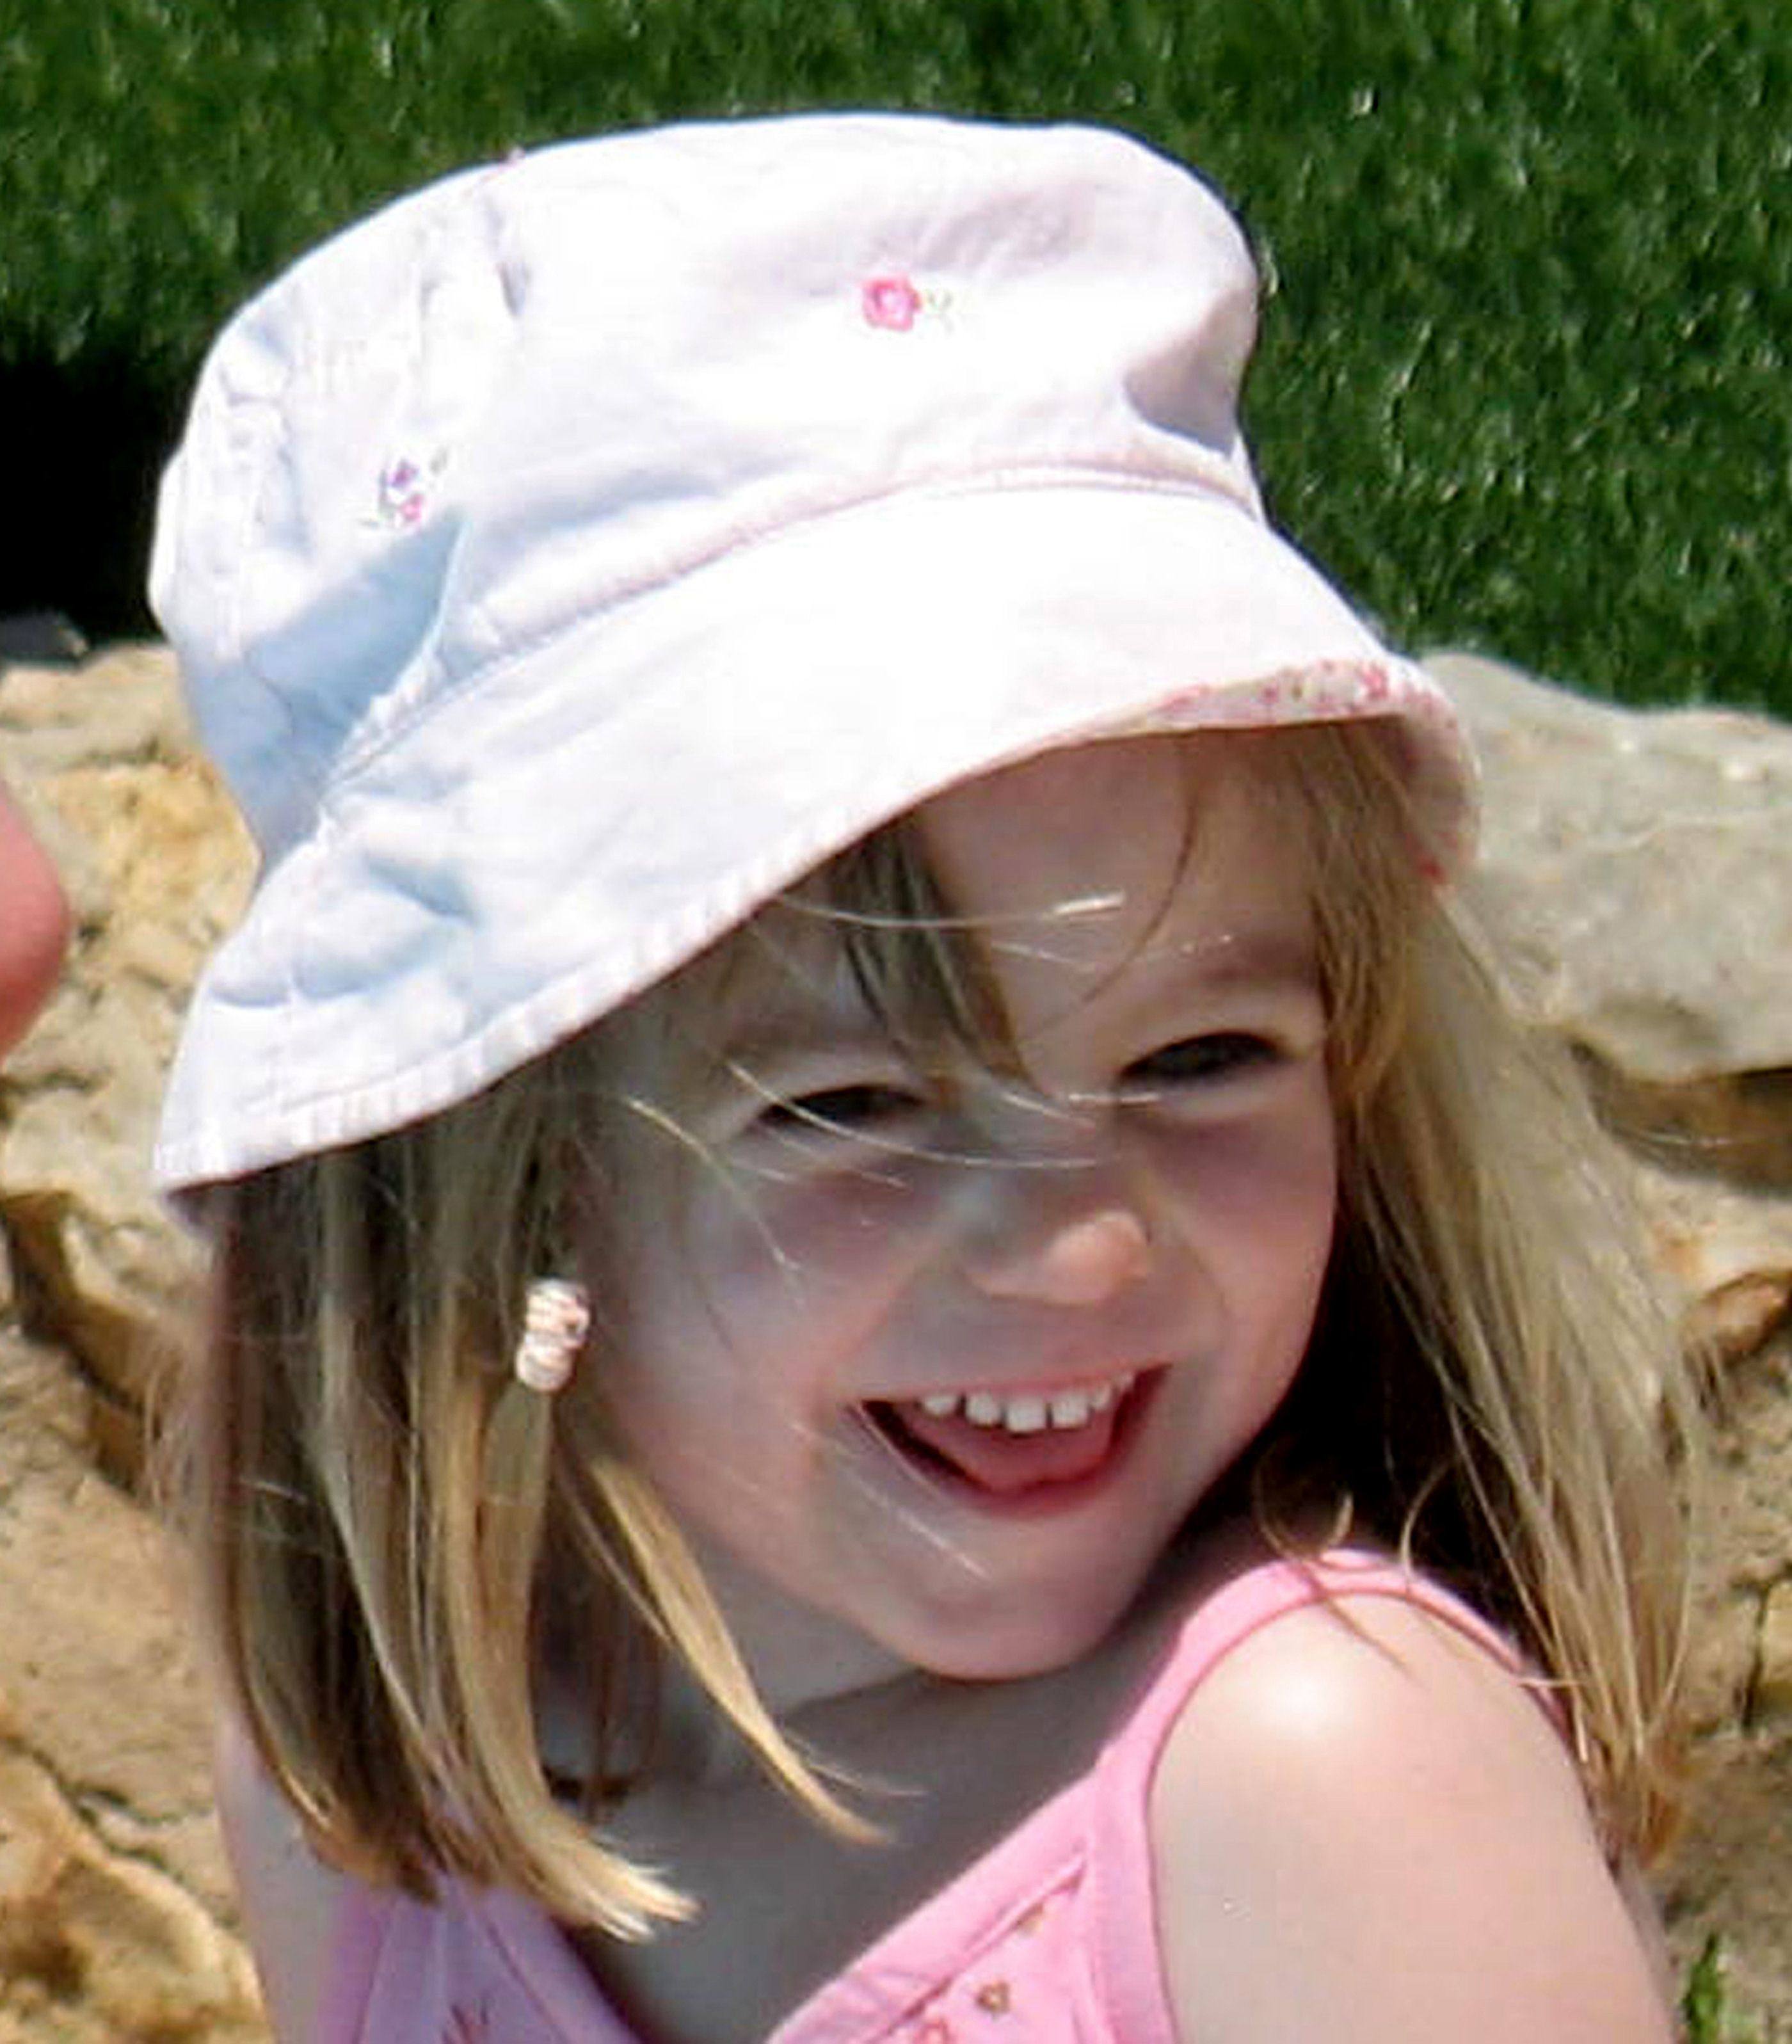 Missing British girl Madeleine McCann is seen in a photo released by her family in 2007. Photo: McCann family via AFP